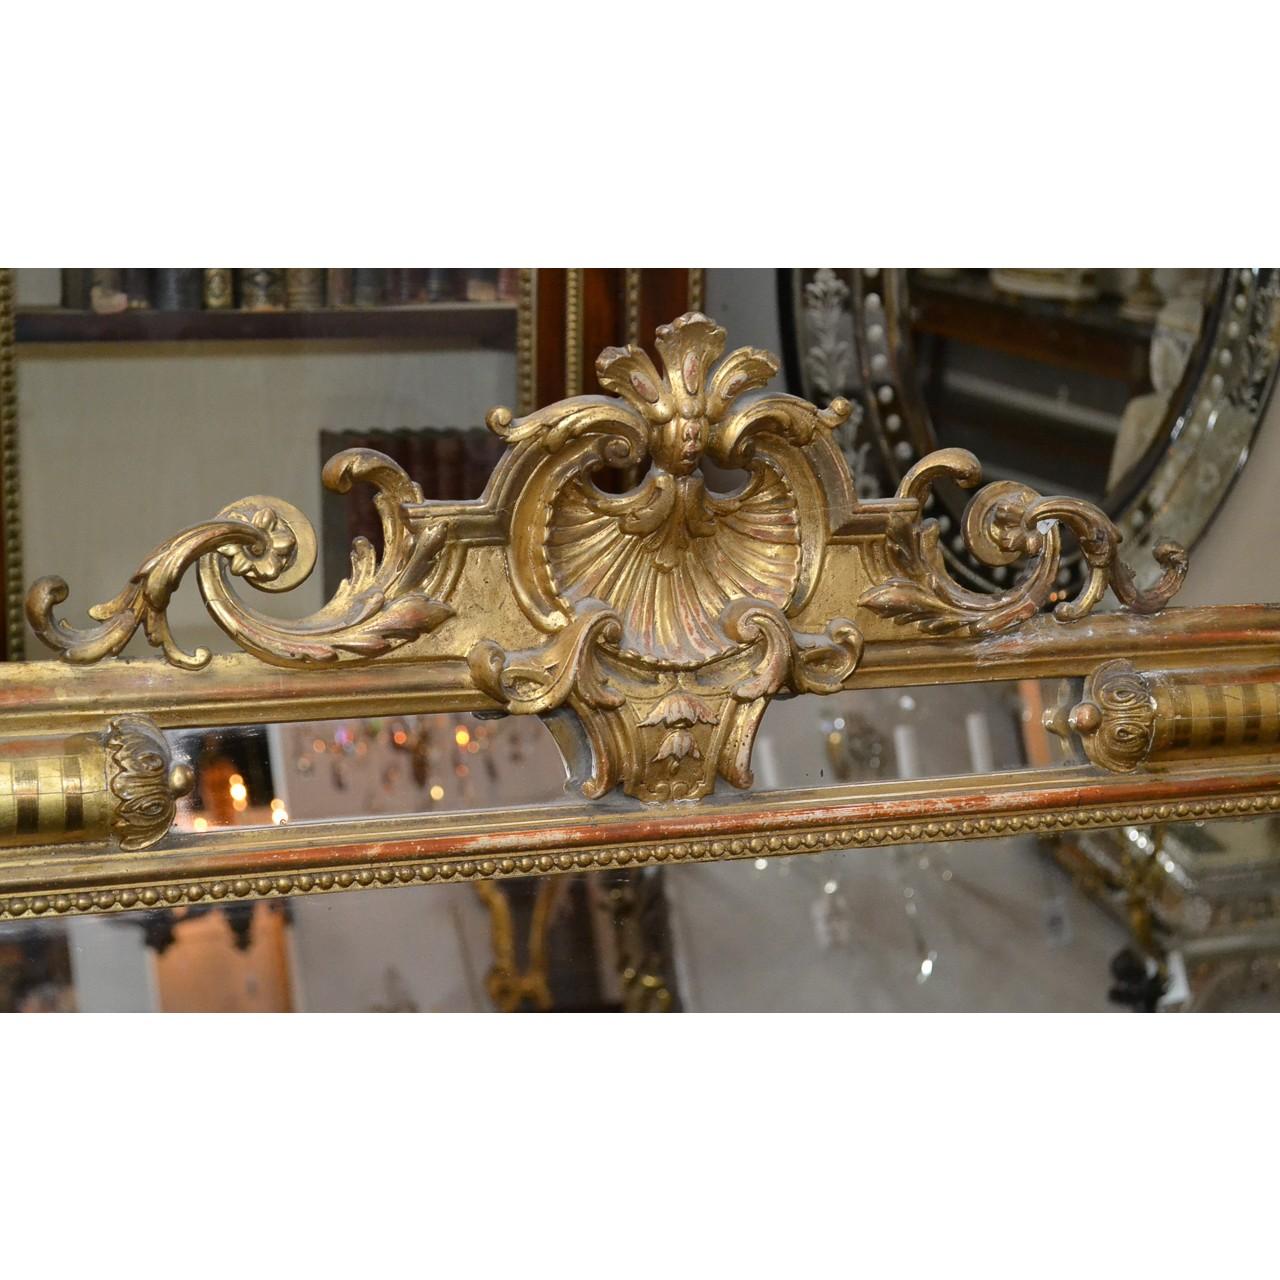 Superb 19th French Louis XV style giltwood wall mirror with an ornately carved crest displaying a large carved shell, flower heads, and scrolling acanthus. The corners with unique convex-shaped accents with leaf crowns. Carved bead inner